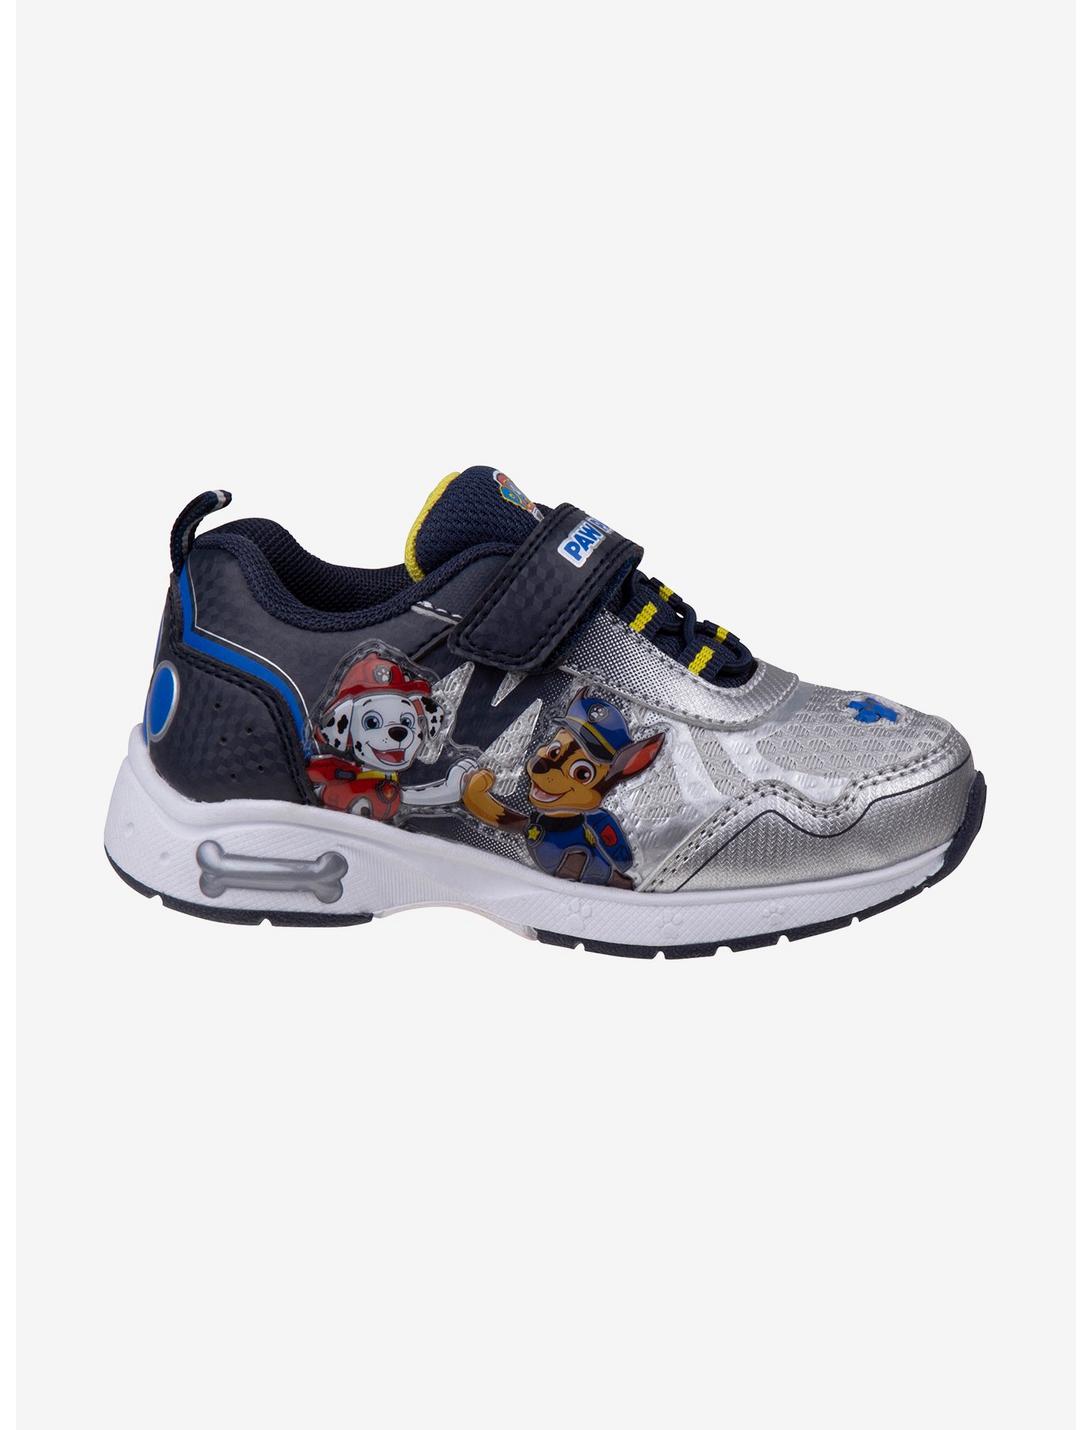 Paw Patrol Boys Blue and Silver Toddler Sneakers, BLUE  NAVY, hi-res